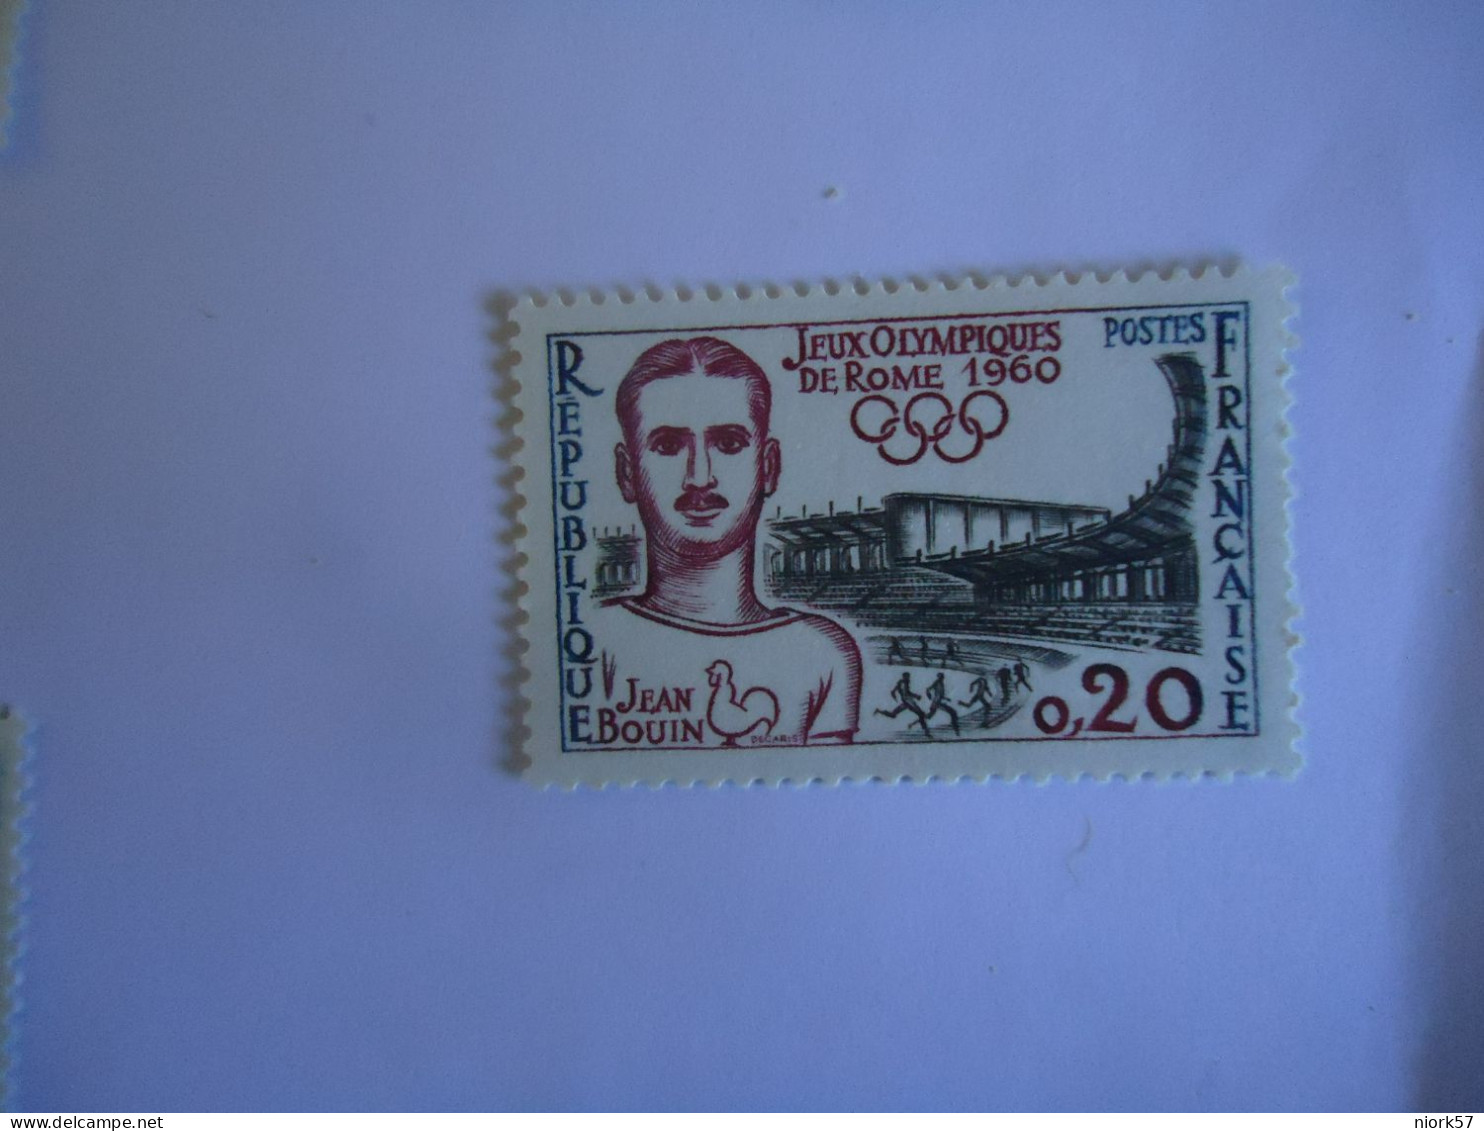 FRANCE ΜΝΗ   STAMPS  OLYMPIC GAMES ΡΟΜΕ  1960 - Sommer 1960: Rom